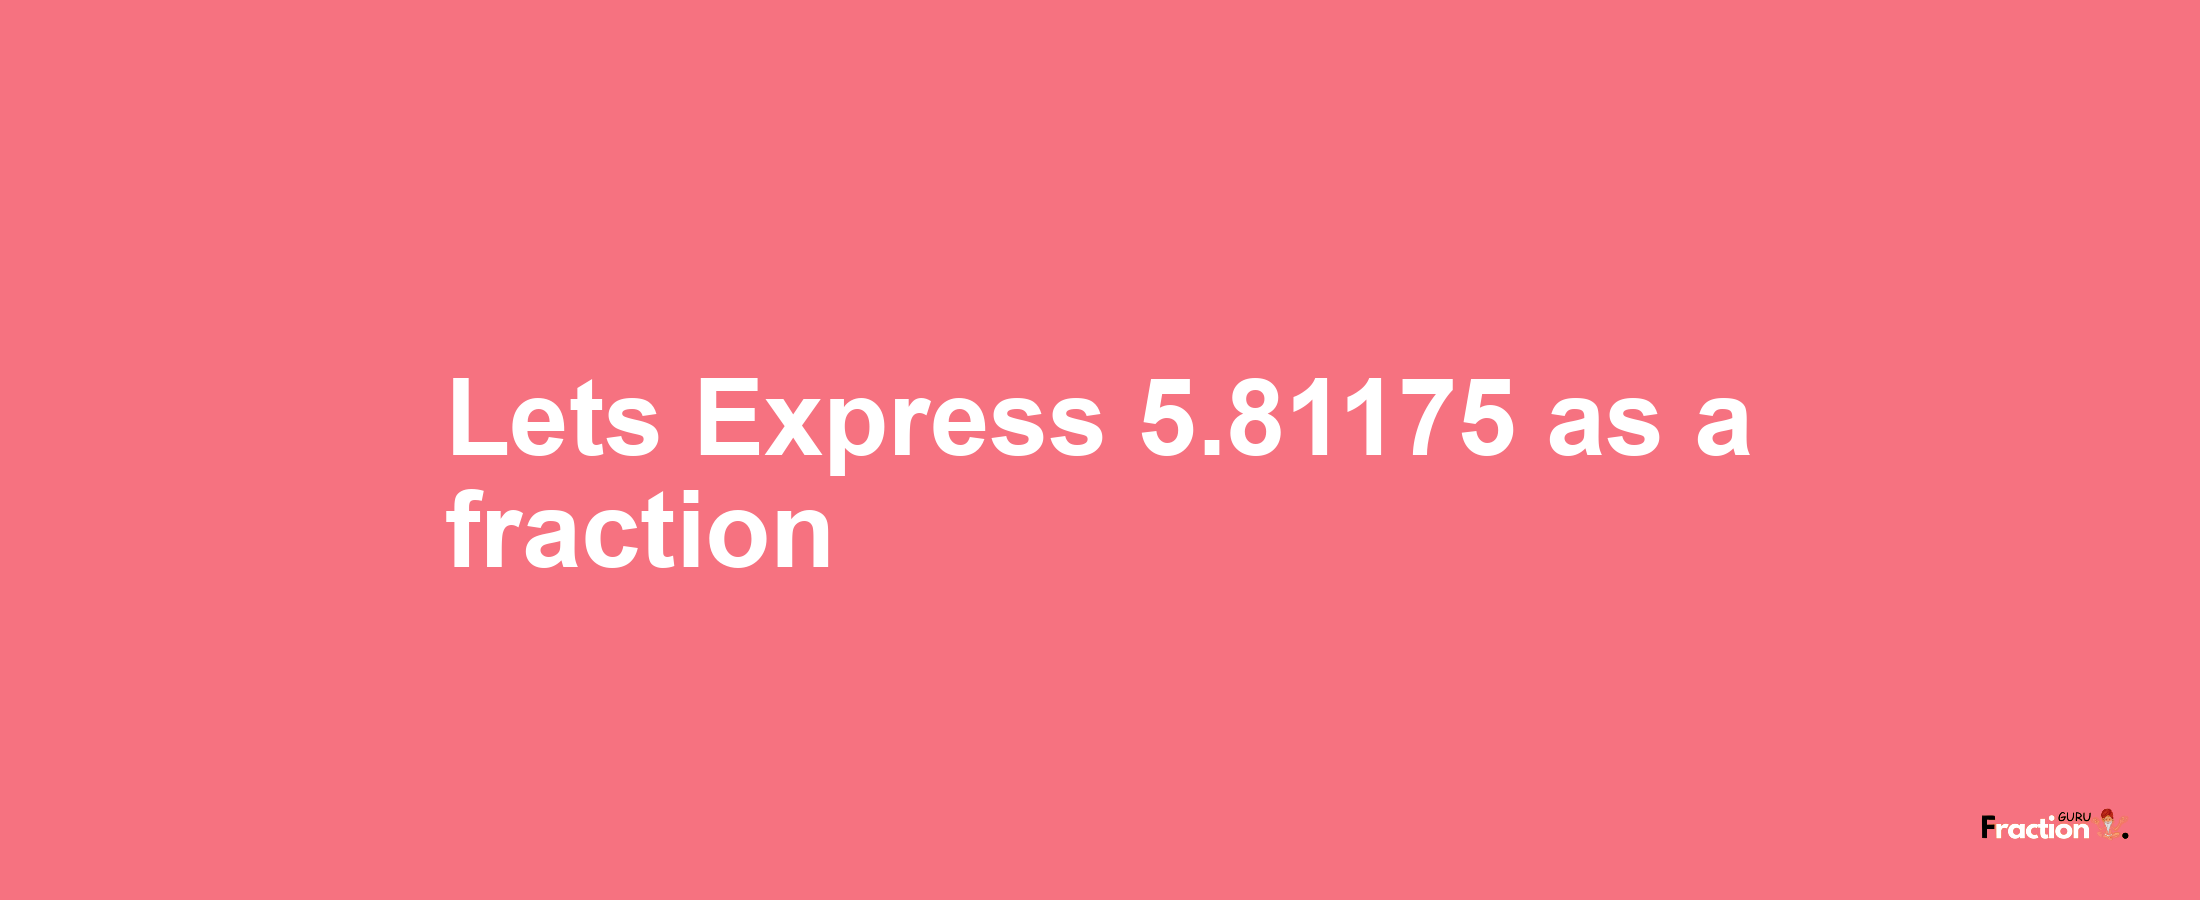 Lets Express 5.81175 as afraction